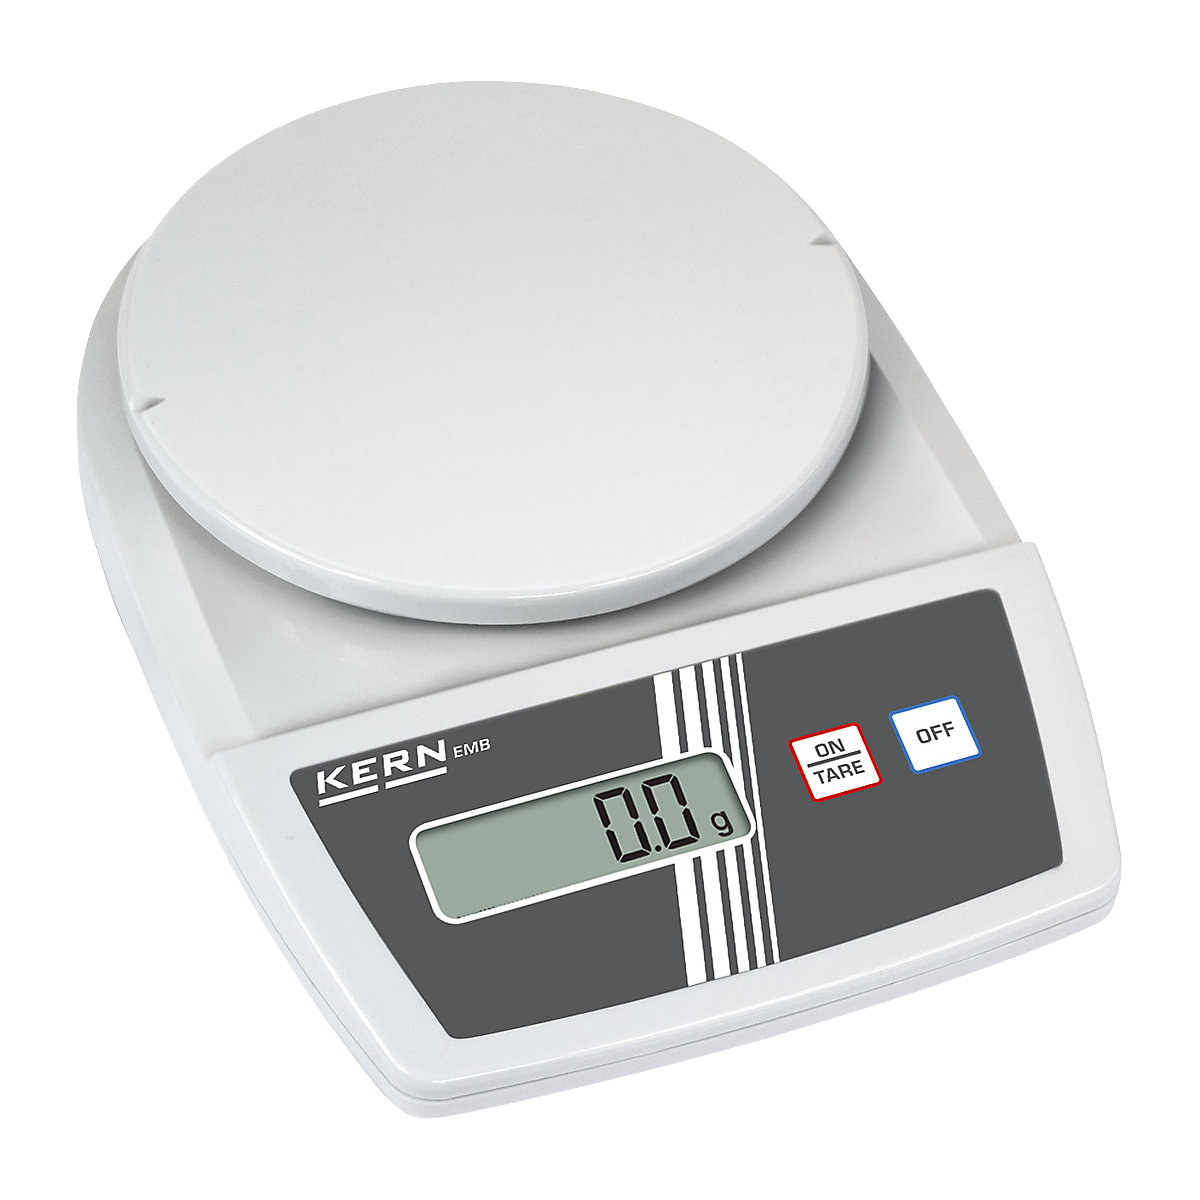 Laboratory scales – KERN, 2 button operation, weighing range up to 1000 g, read-out accuracy 0.01 g, weighing plate 150 mm-1